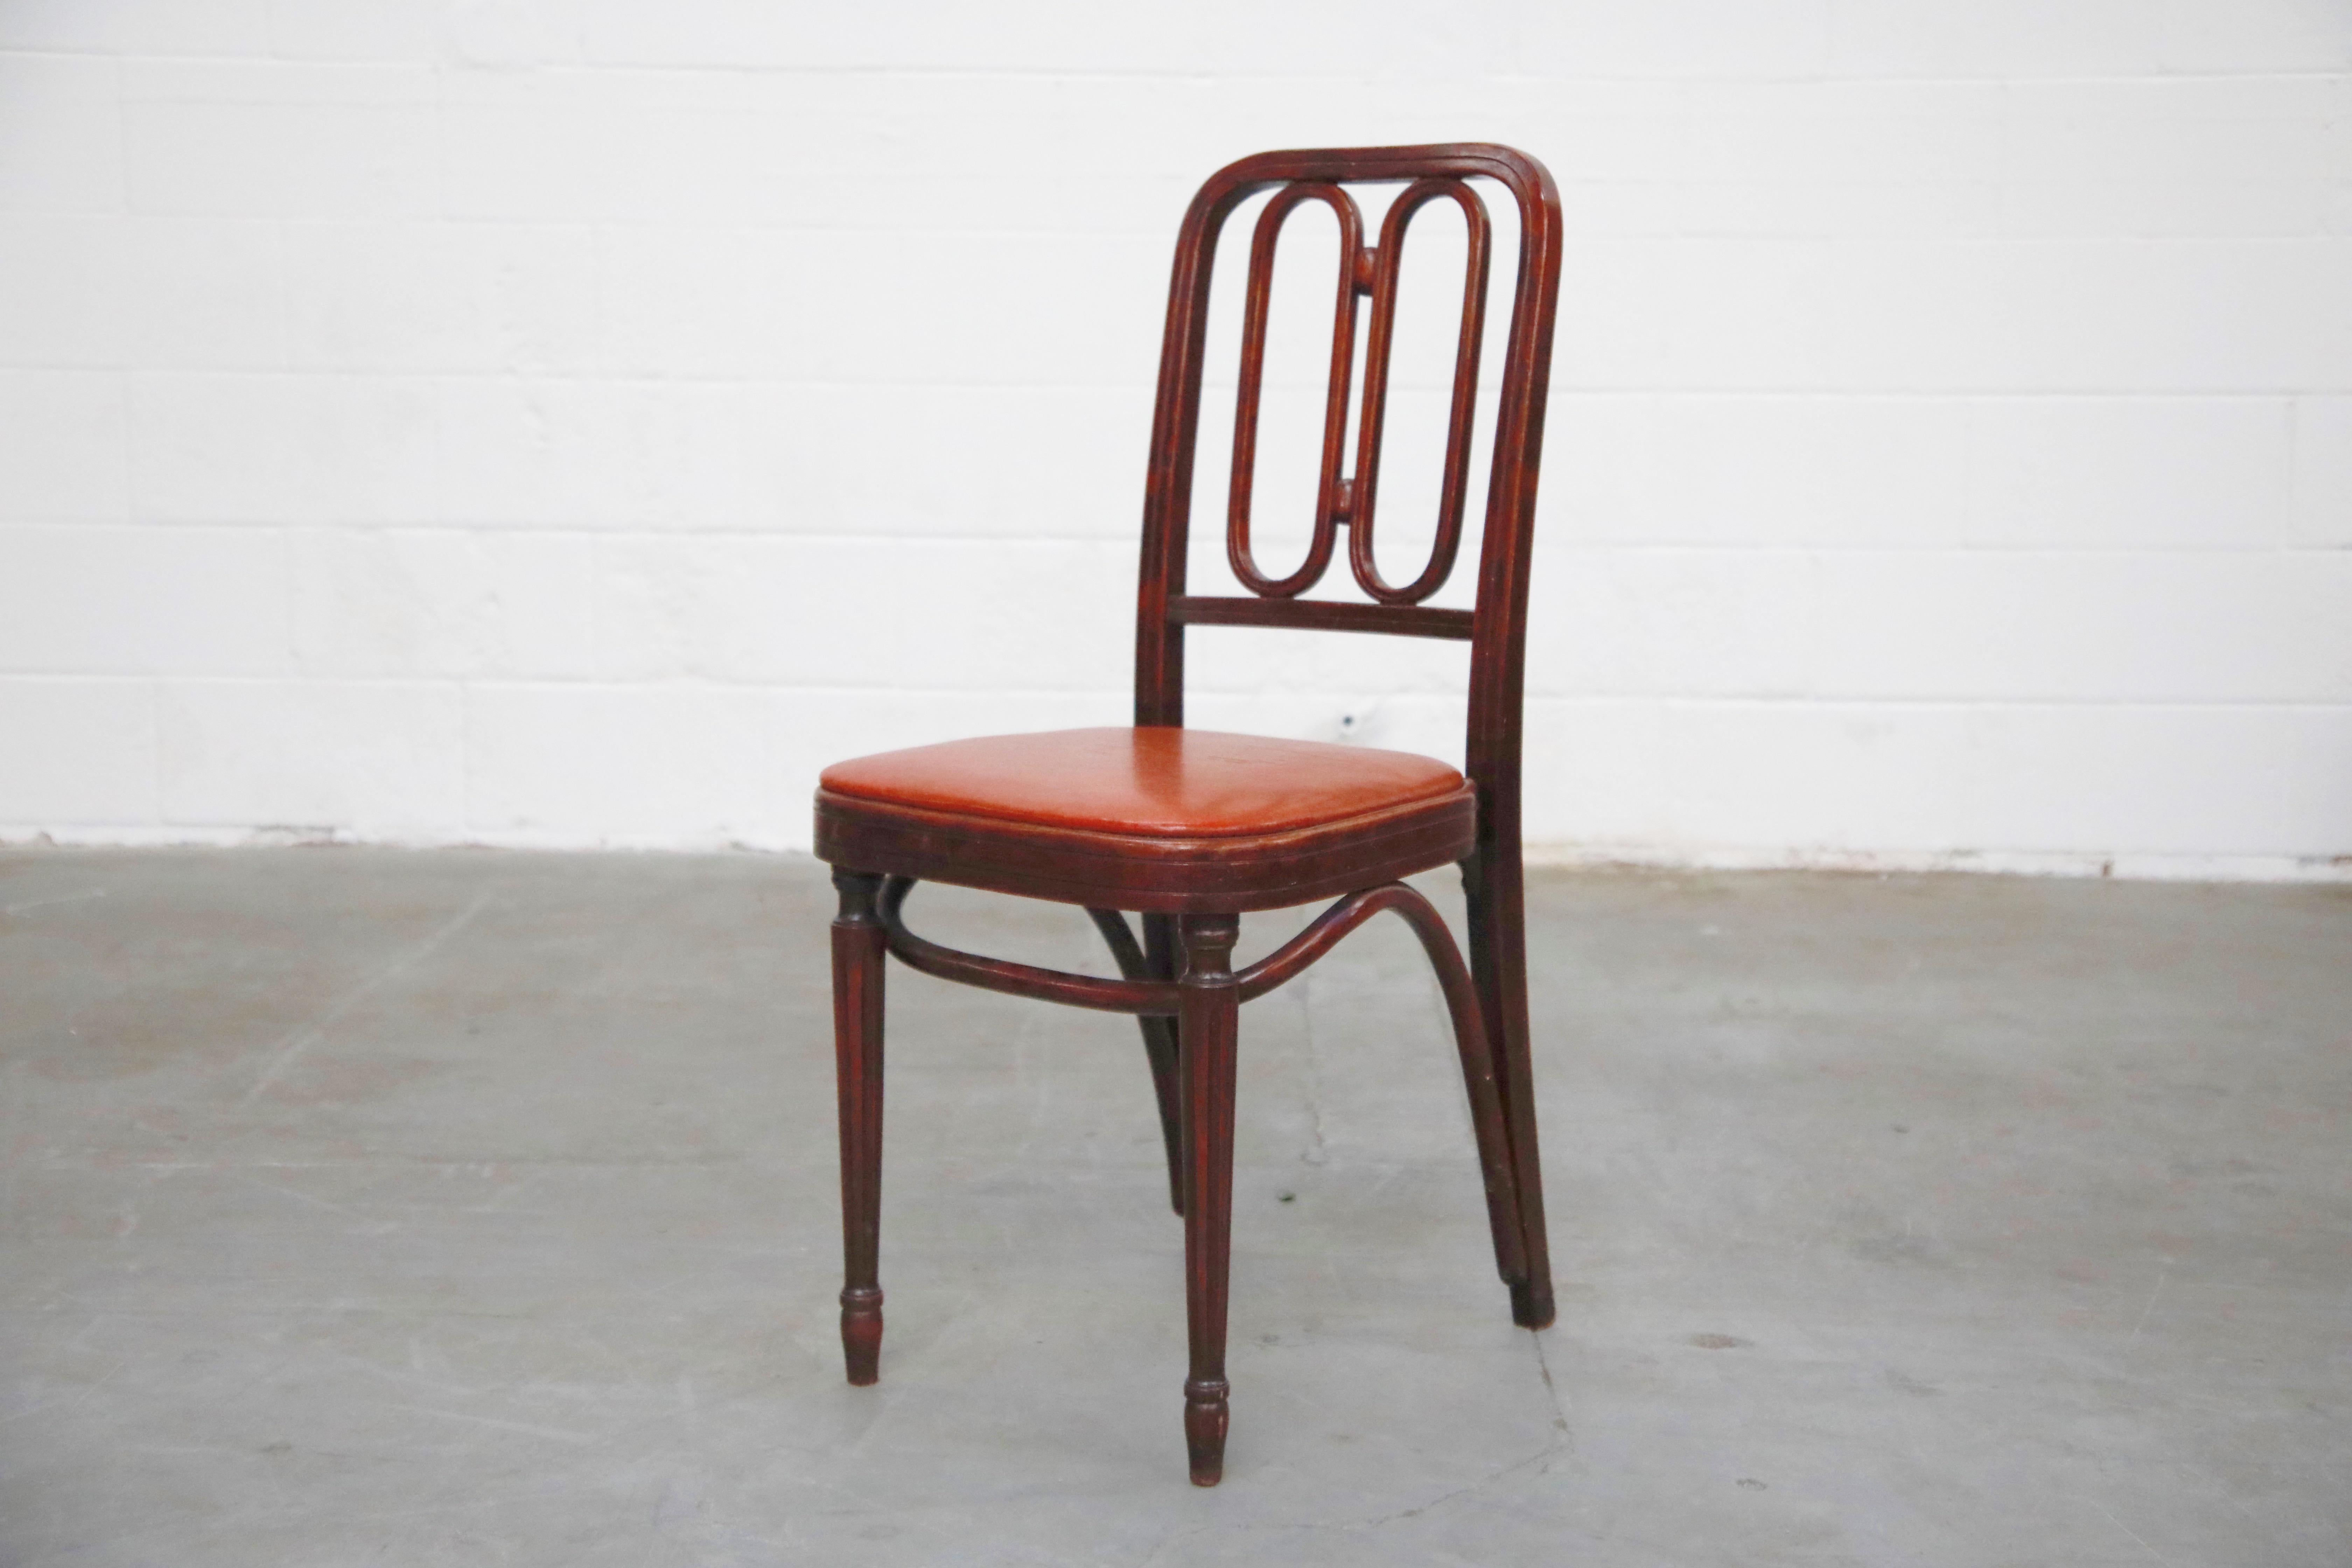 American Bentwood Dining Chair by Josef Hoffmann for Thonet, circa 1920s, Signed